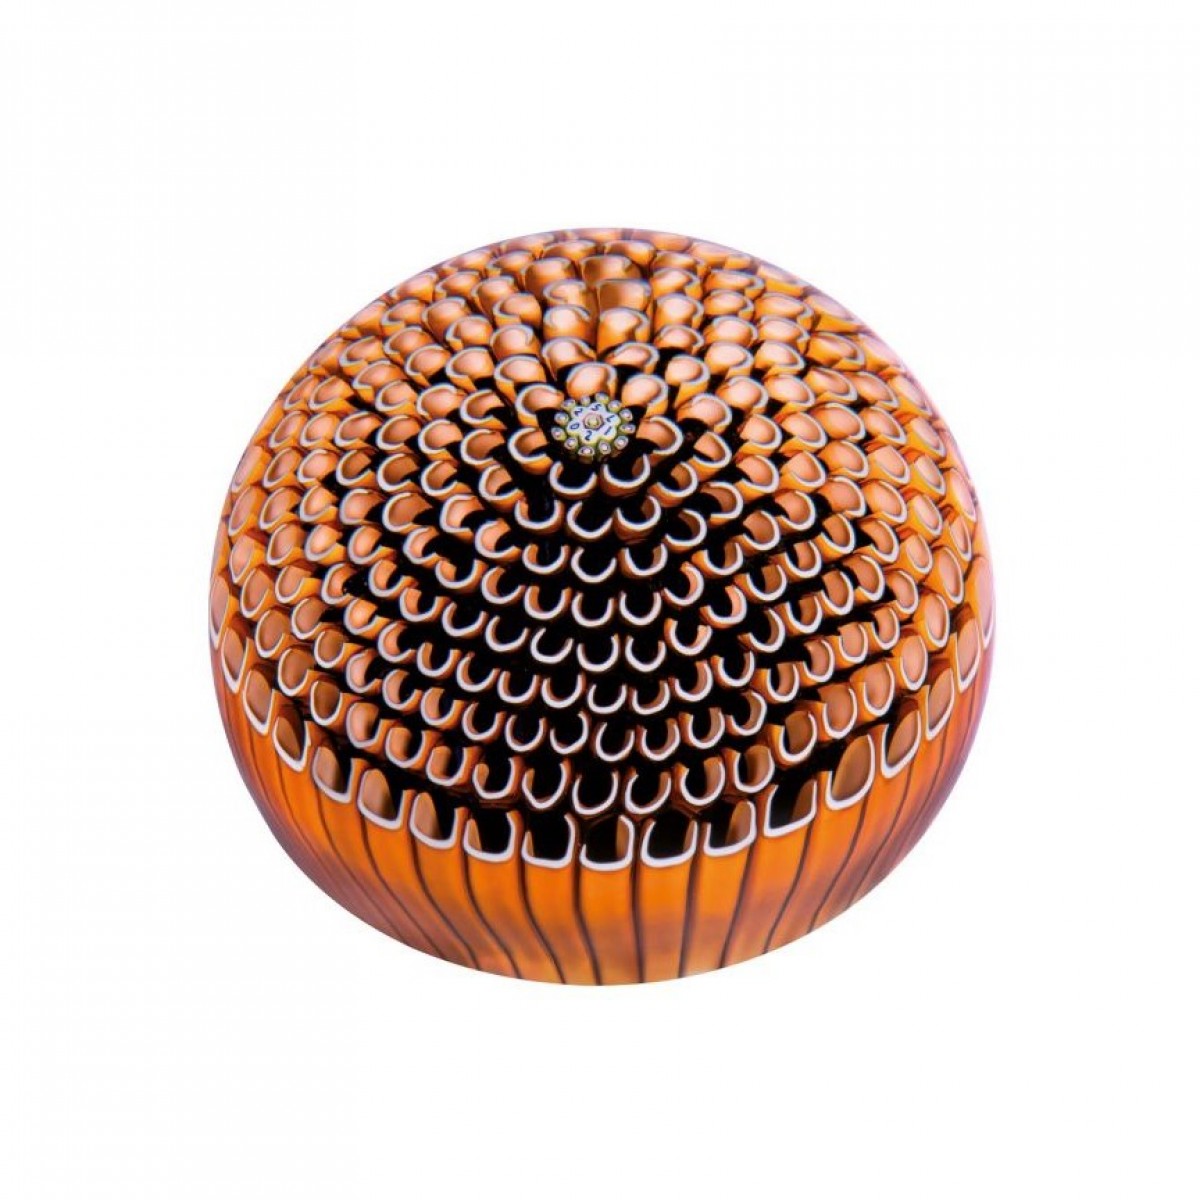 Paperweights 2021 - Honeycomb (Limited Edition)